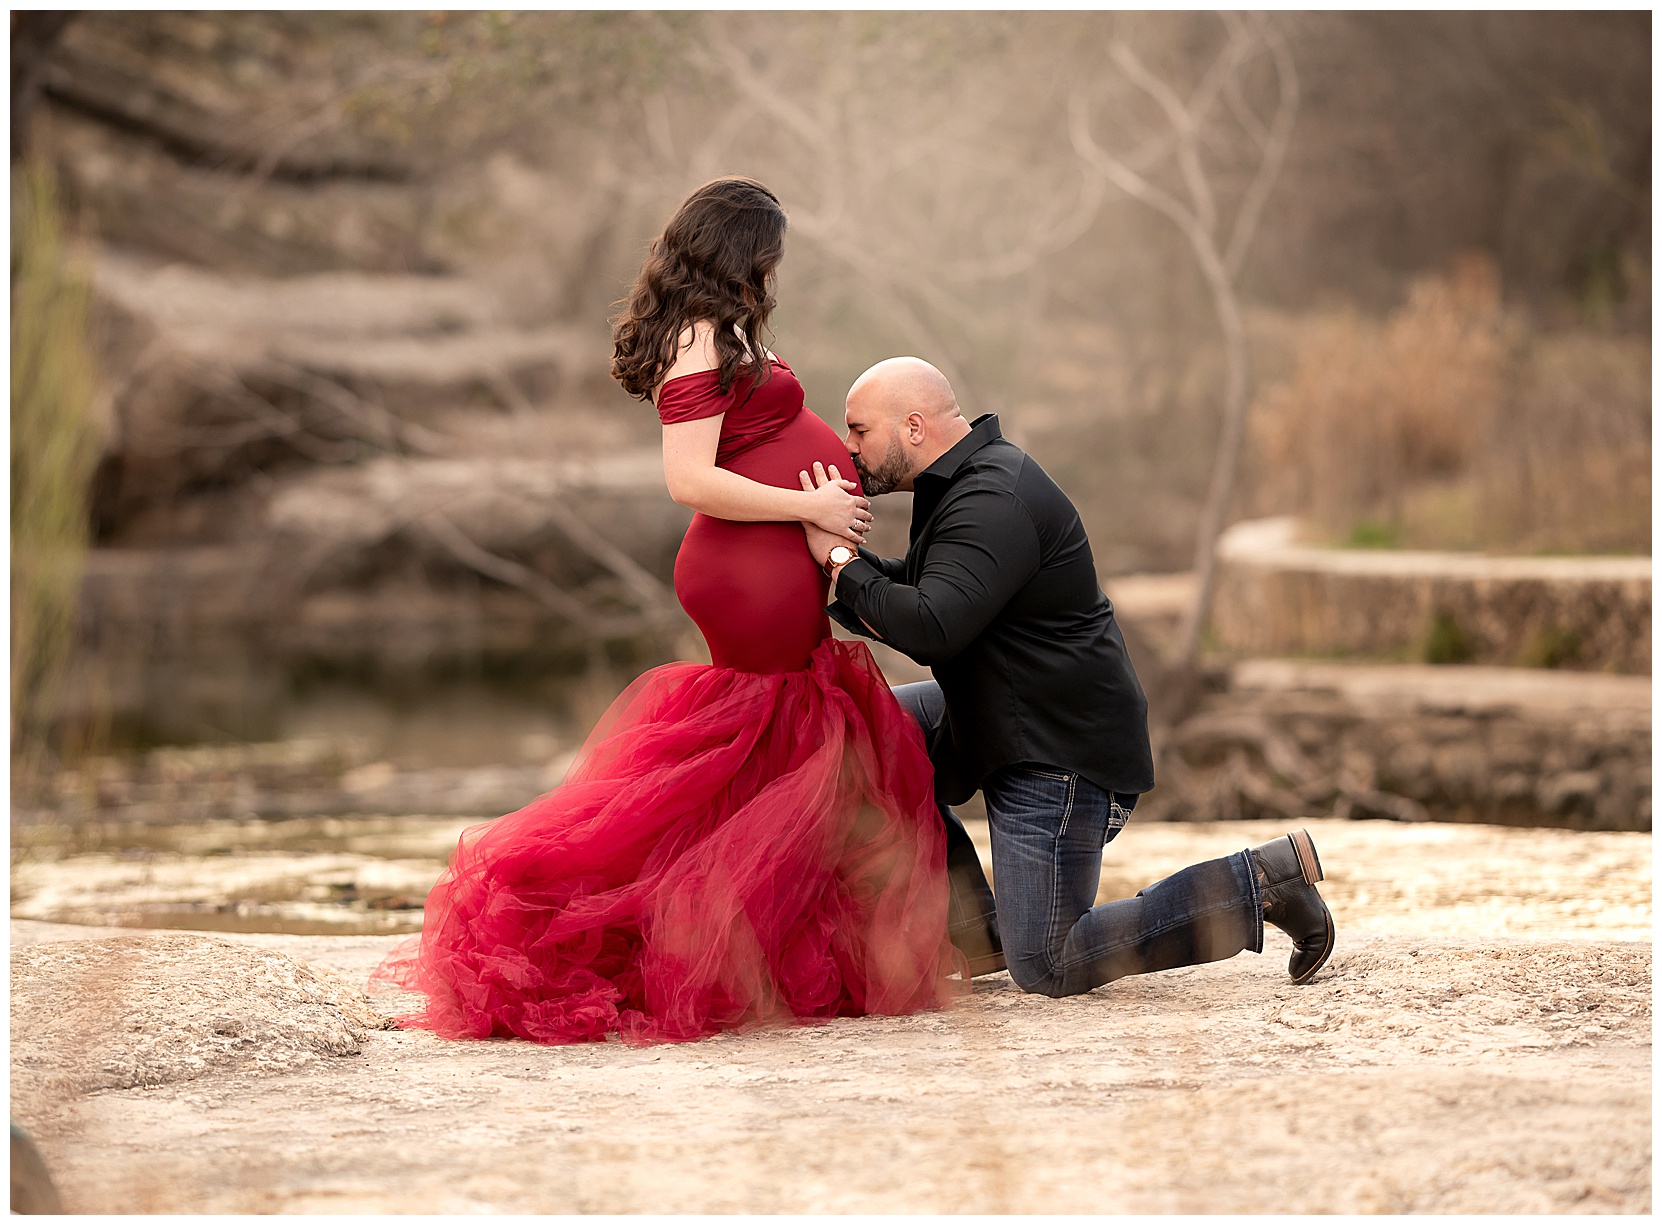 outdoor maternity photo picture featuring a woman in a red maternity gown, her partner is kneeling down in front of her and kissing her belly